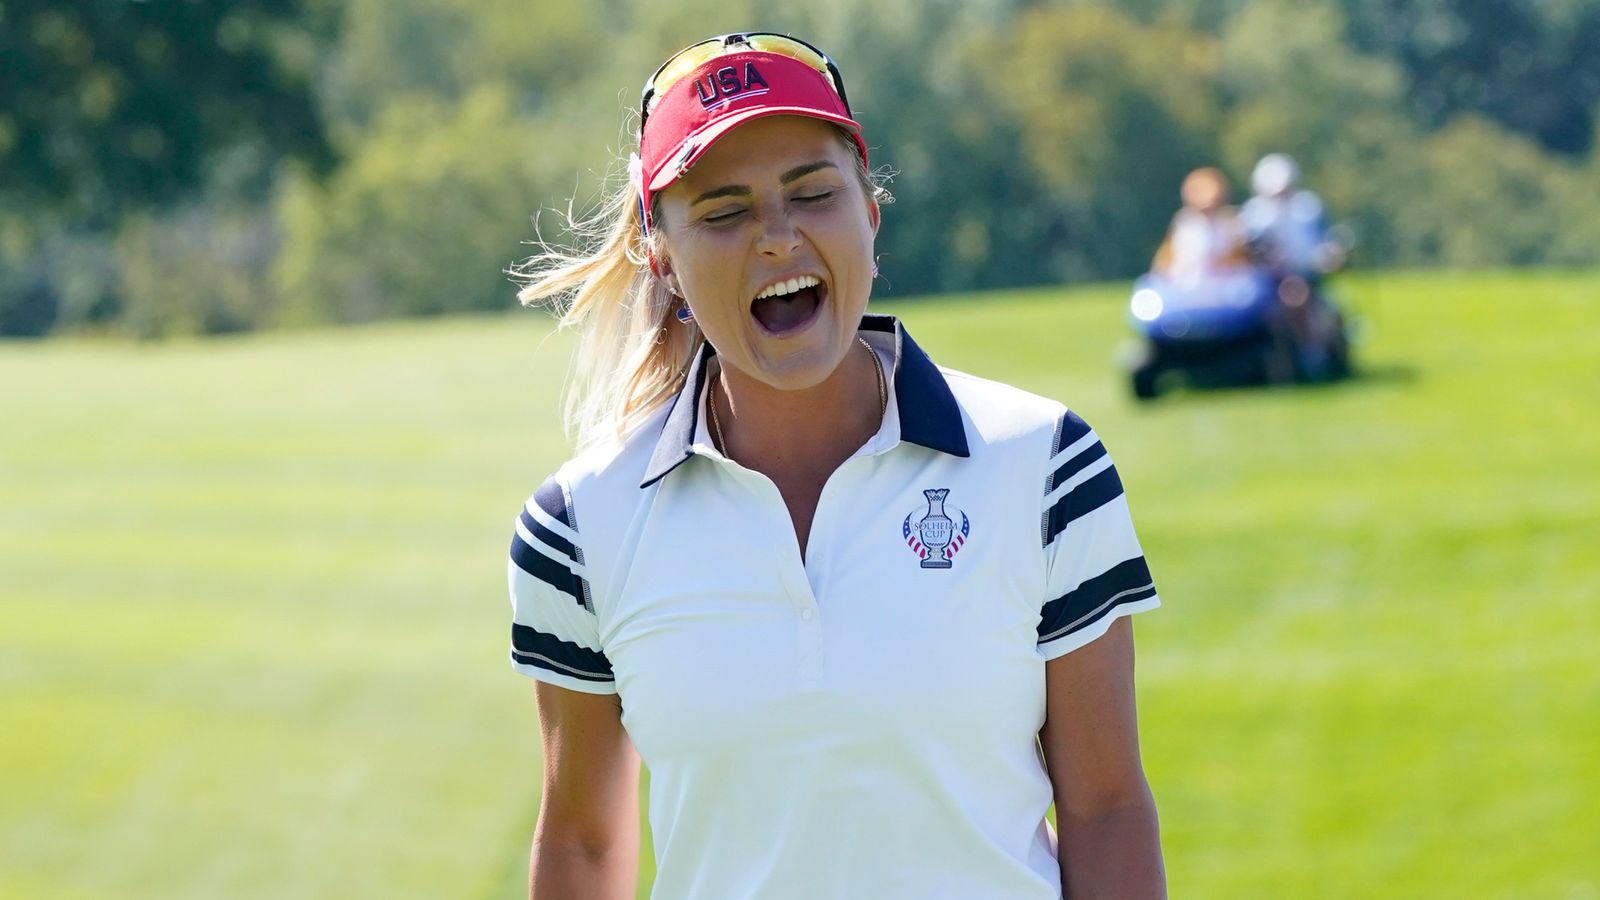 Solheim Cup 2021: Anna Nordqvist and Lexi Thompson to face historic rematch in Monday singles